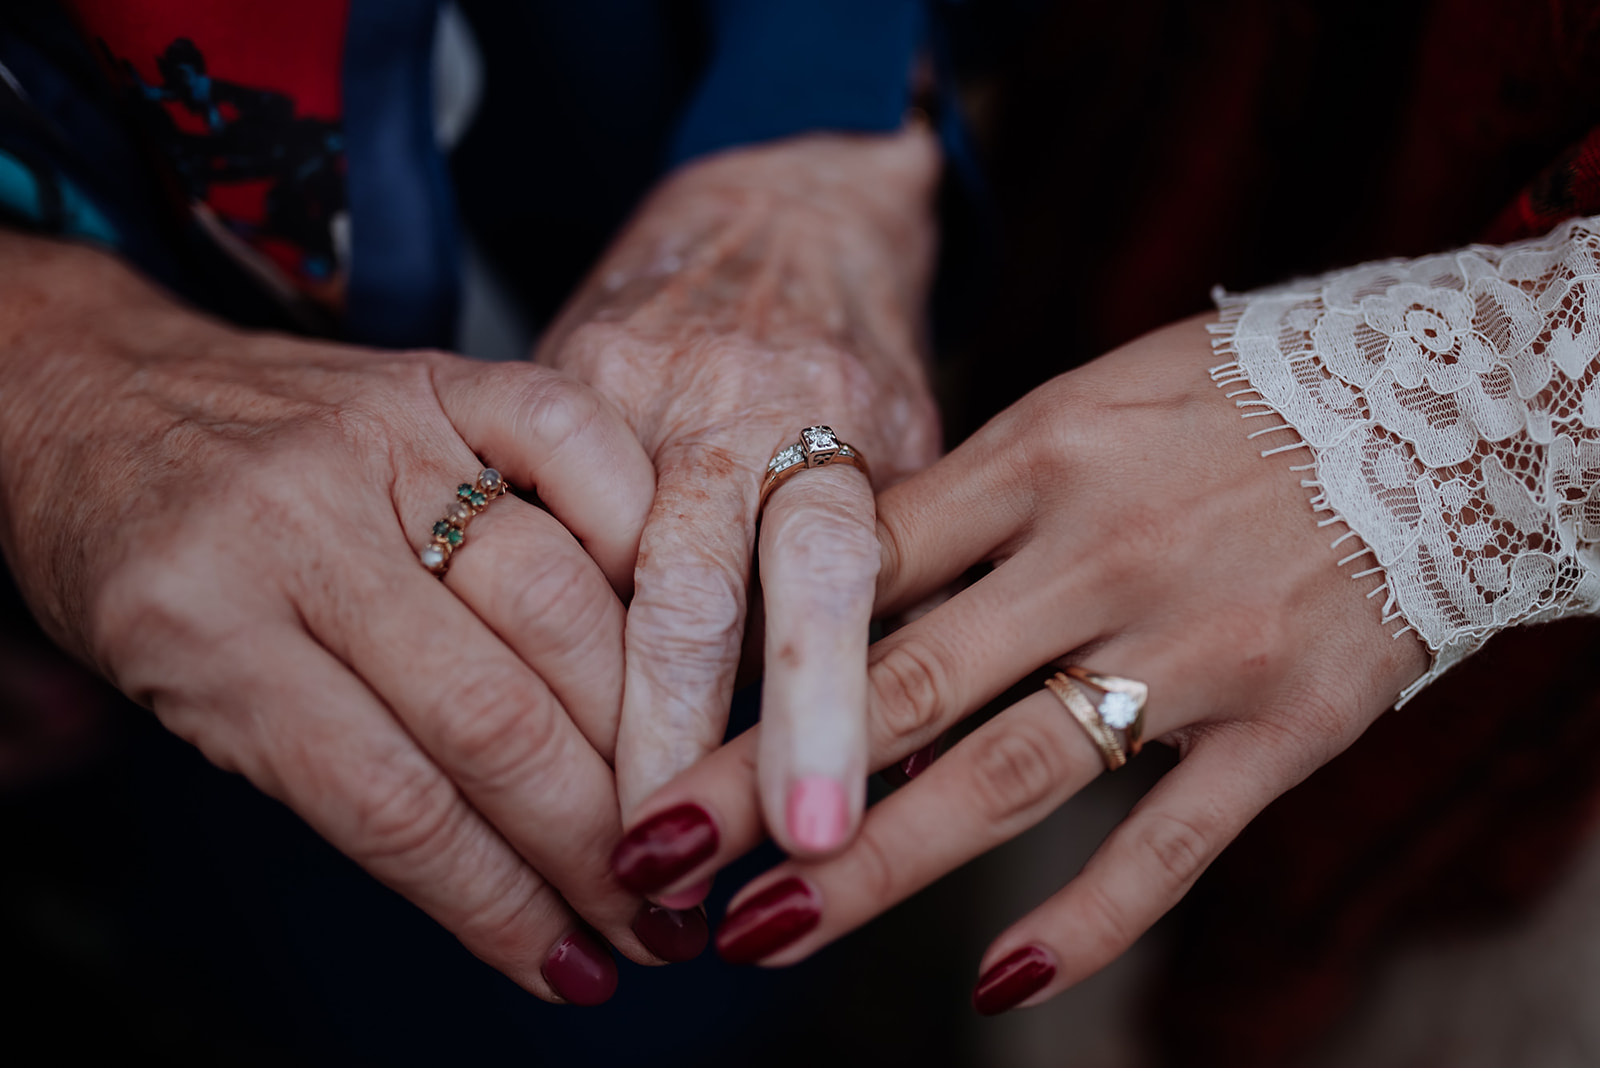 Three generations of women's hands with their antique wedding rings.